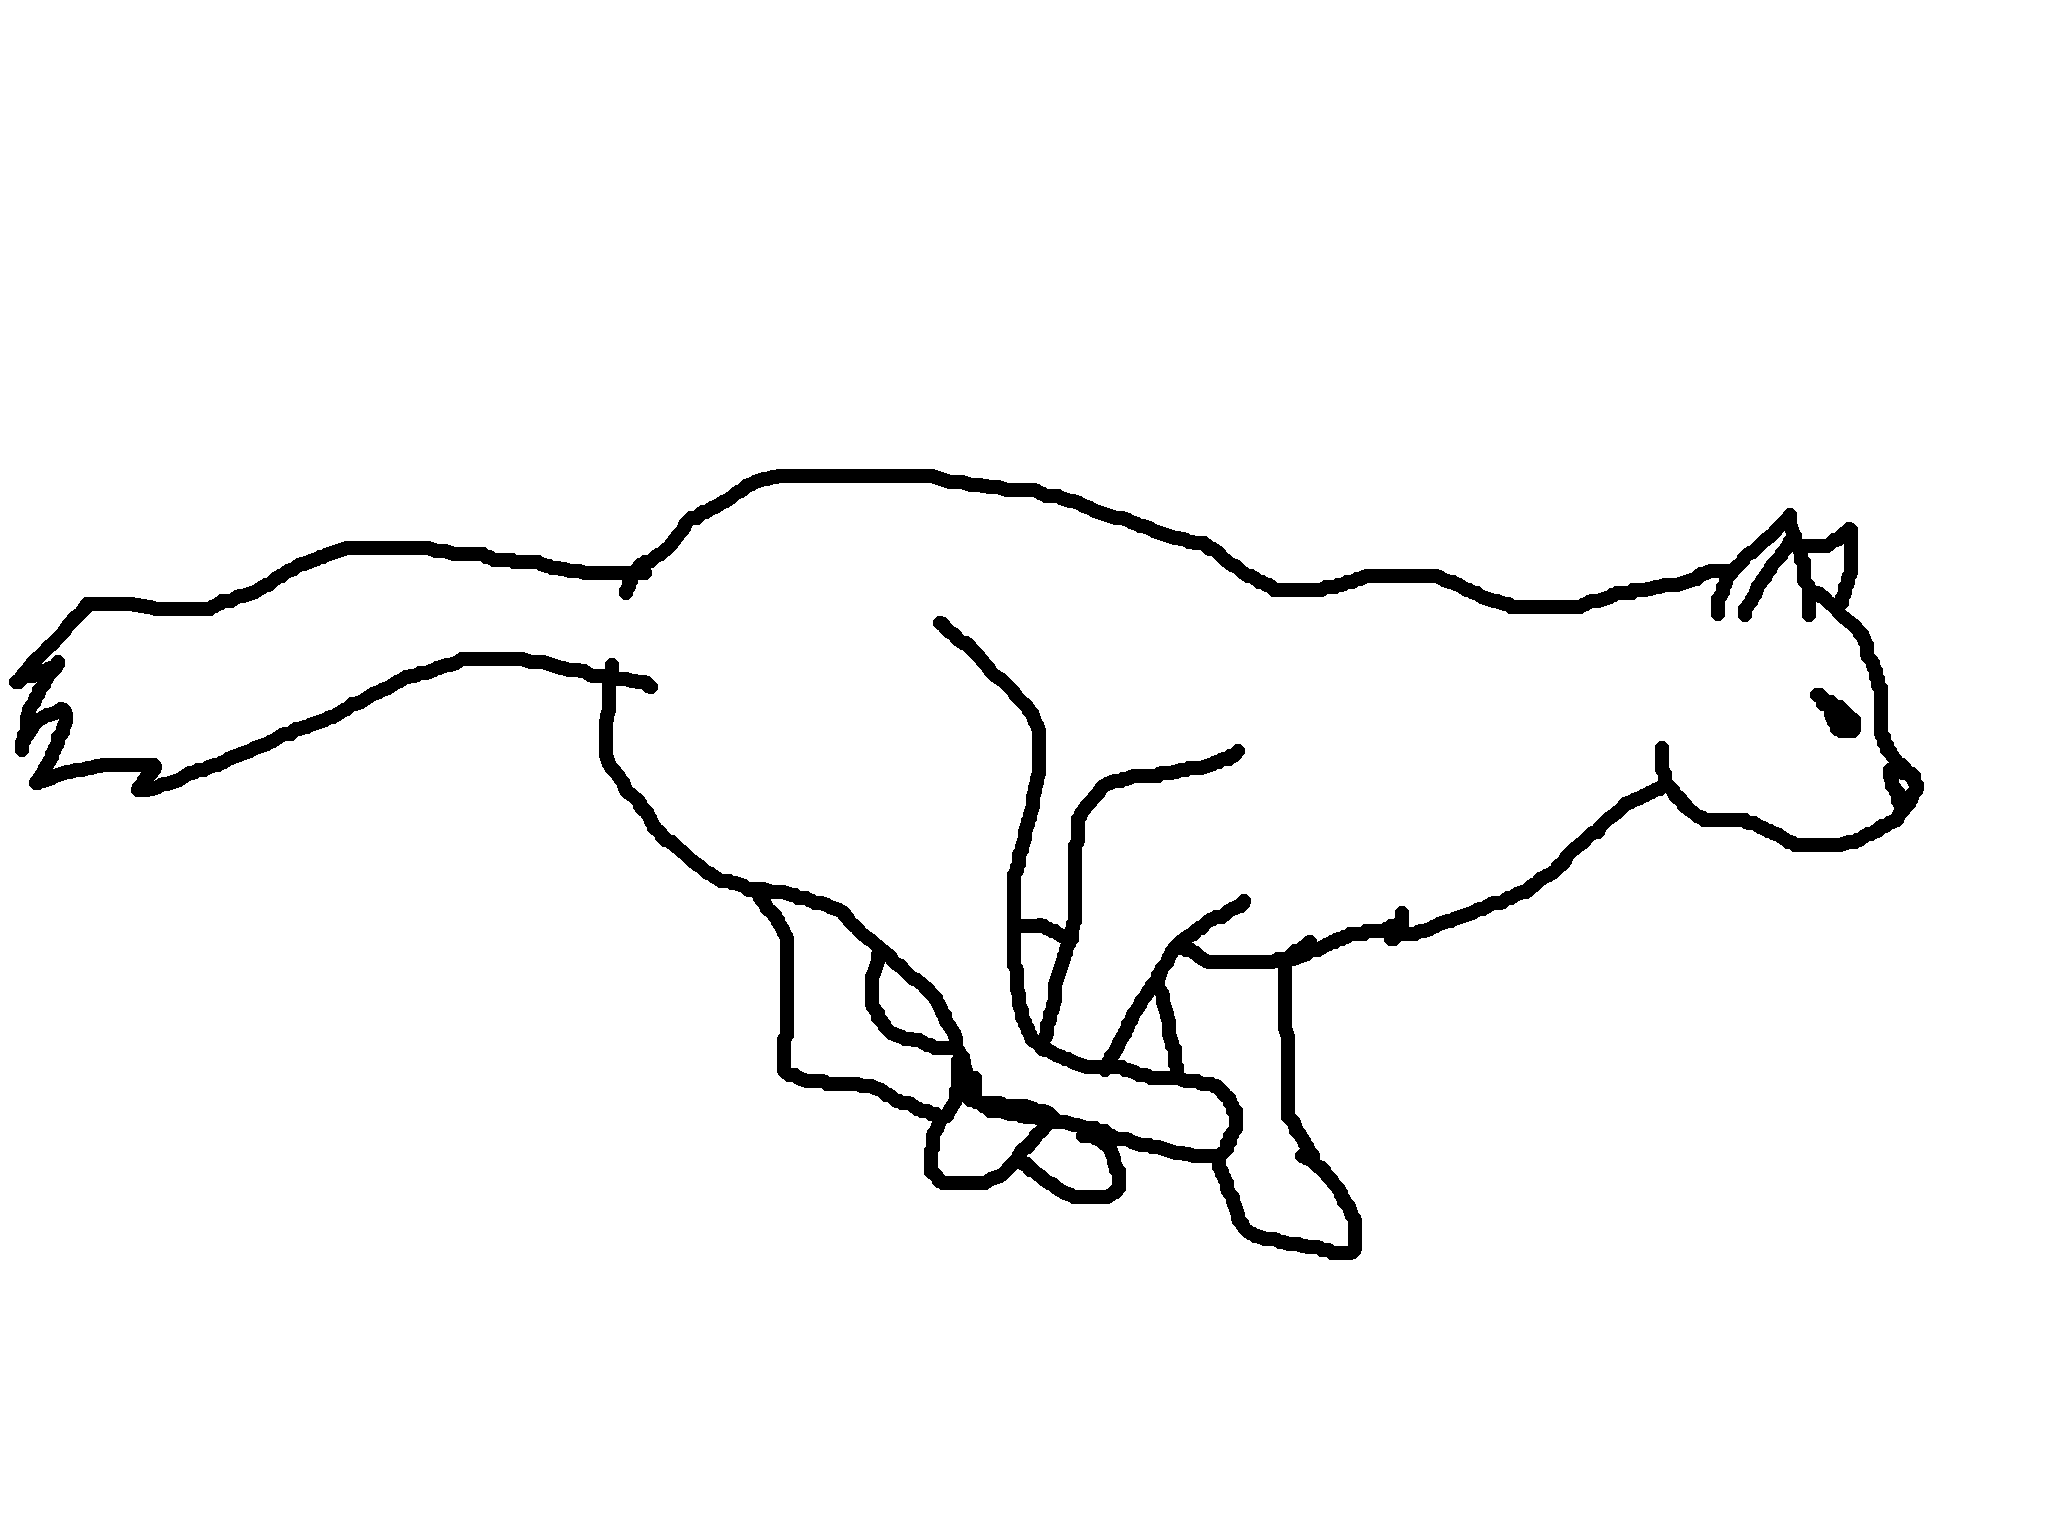 Realistic running cat lineart